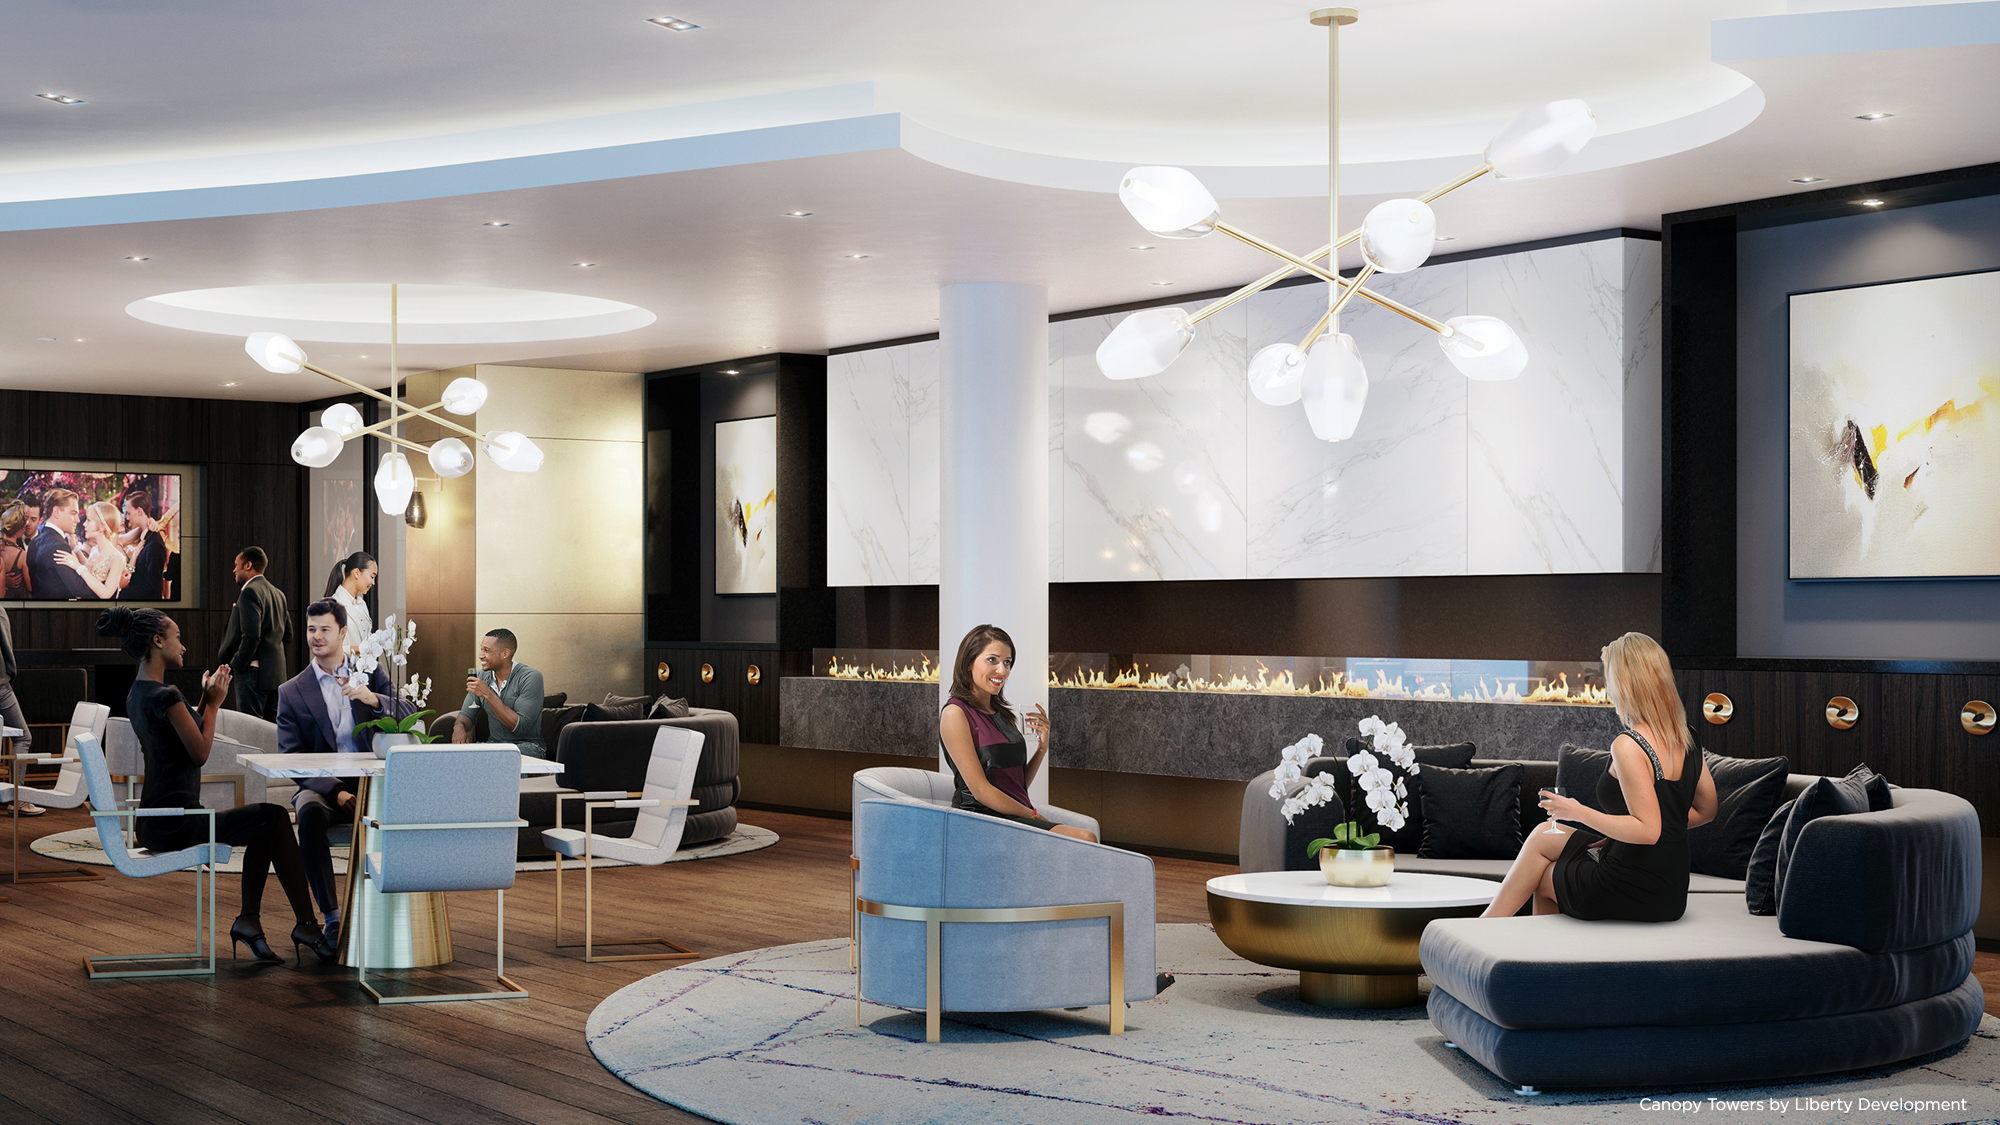 Canopy Towers - Party Room Rendering by Liberty Development